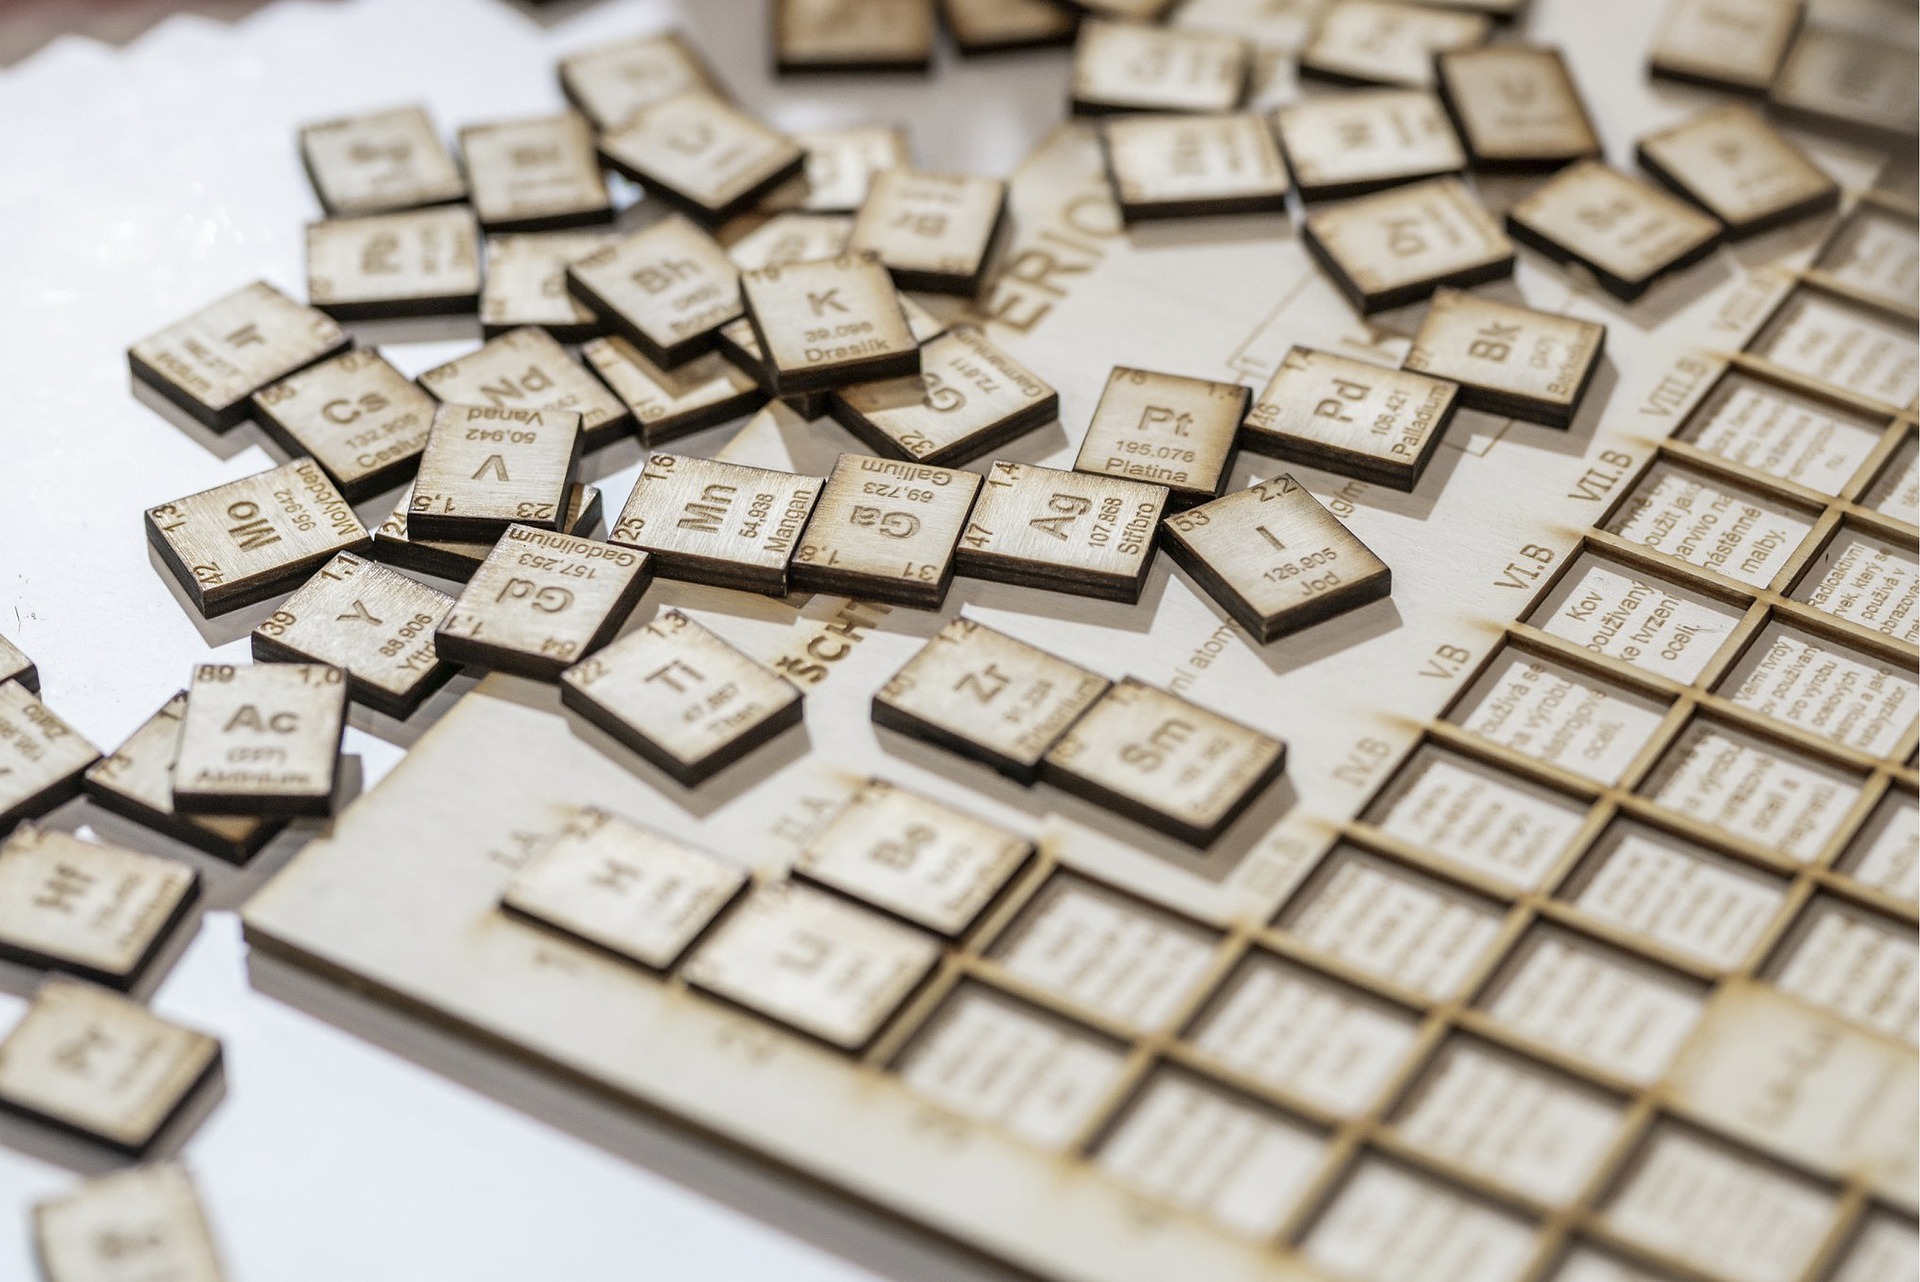 Wooden pieces with periodic elements engraved scattered across a table